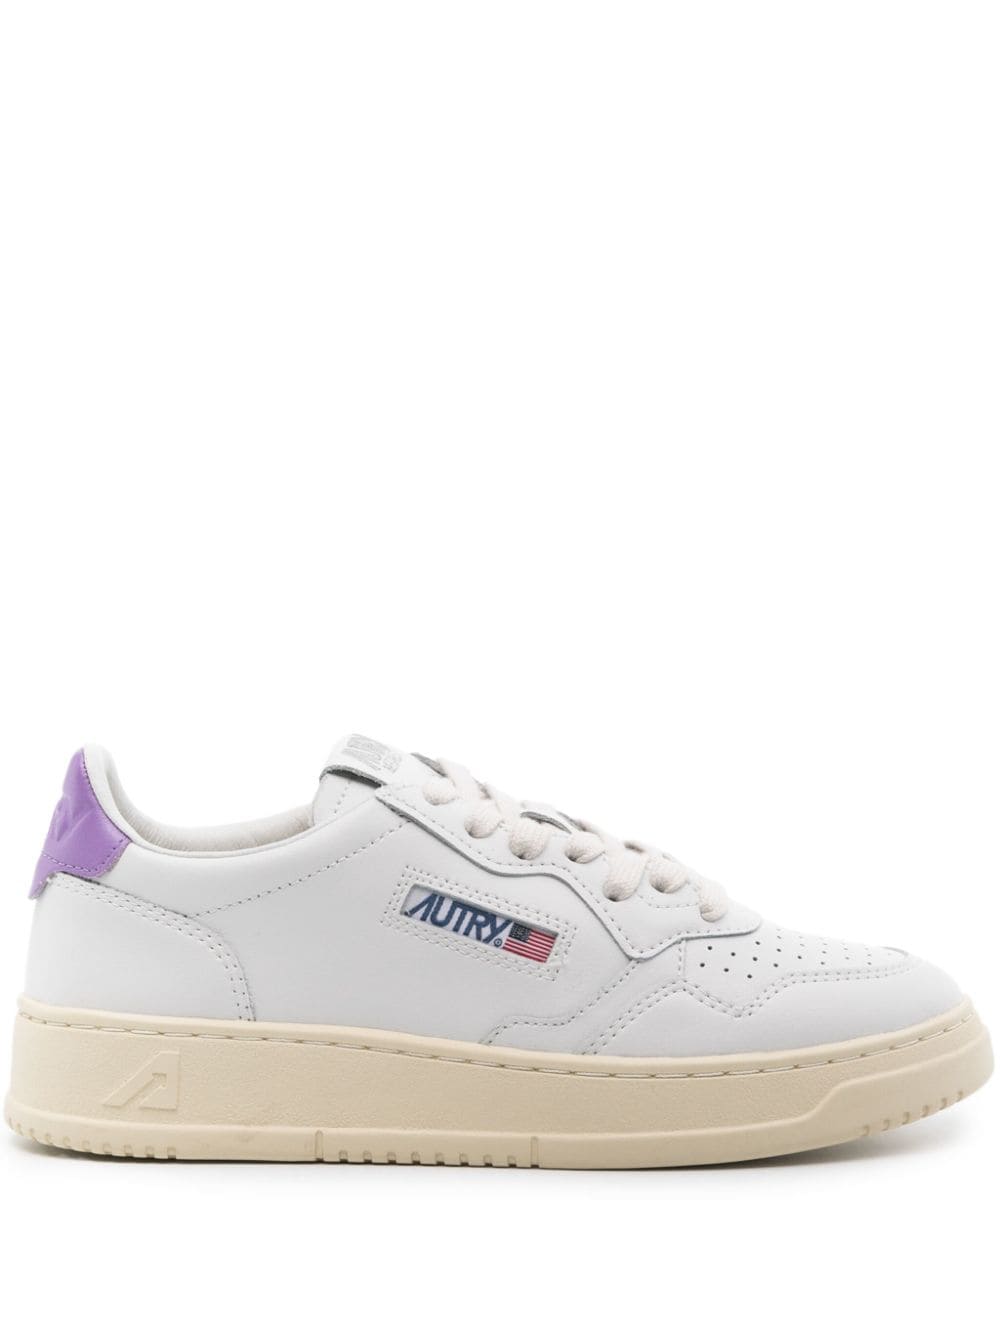 Autry Medalist leather sneakers - White von Autry